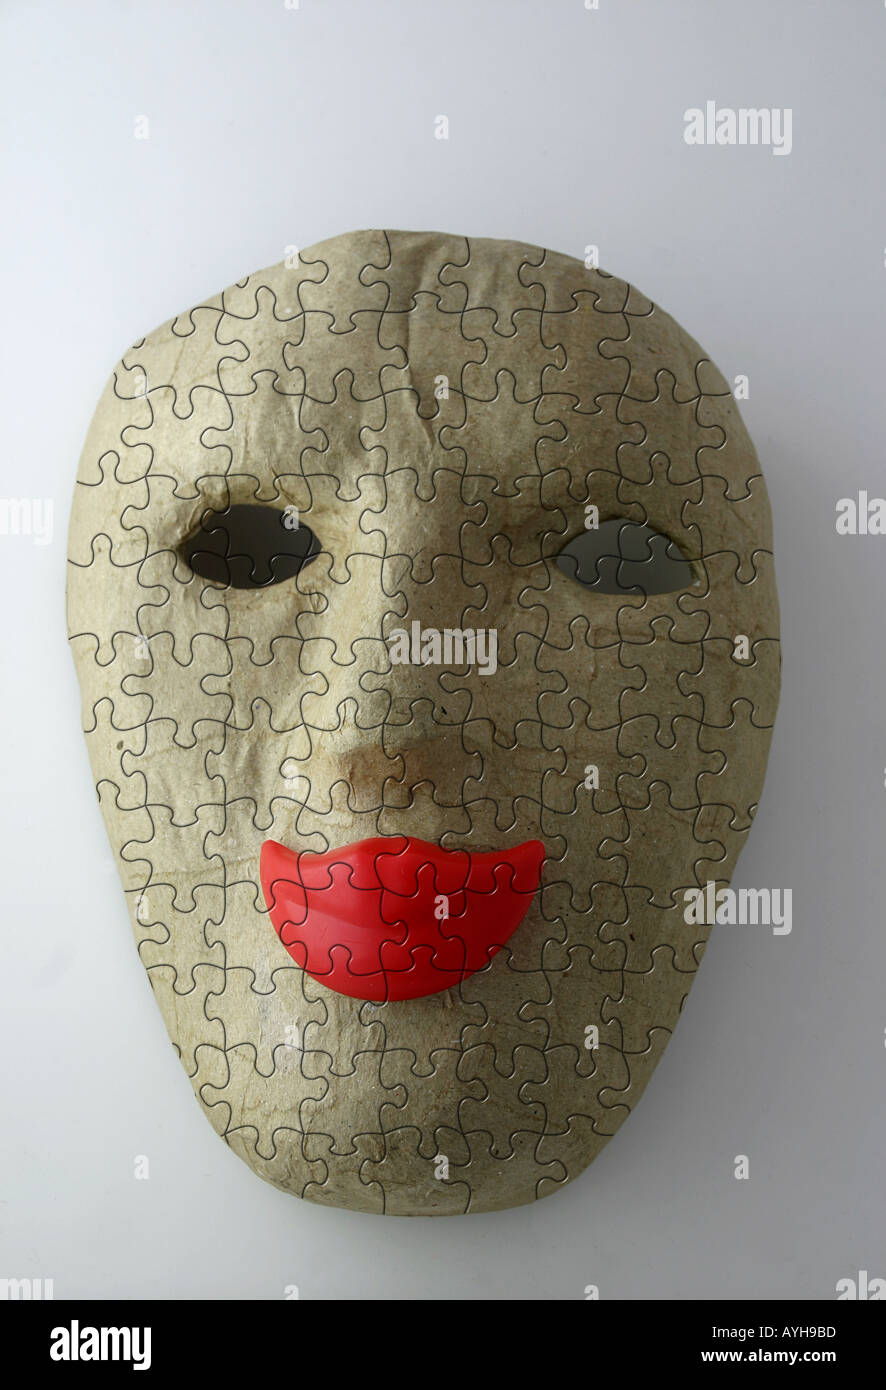 Puzzled face mask with smiling red lips Stock Photo